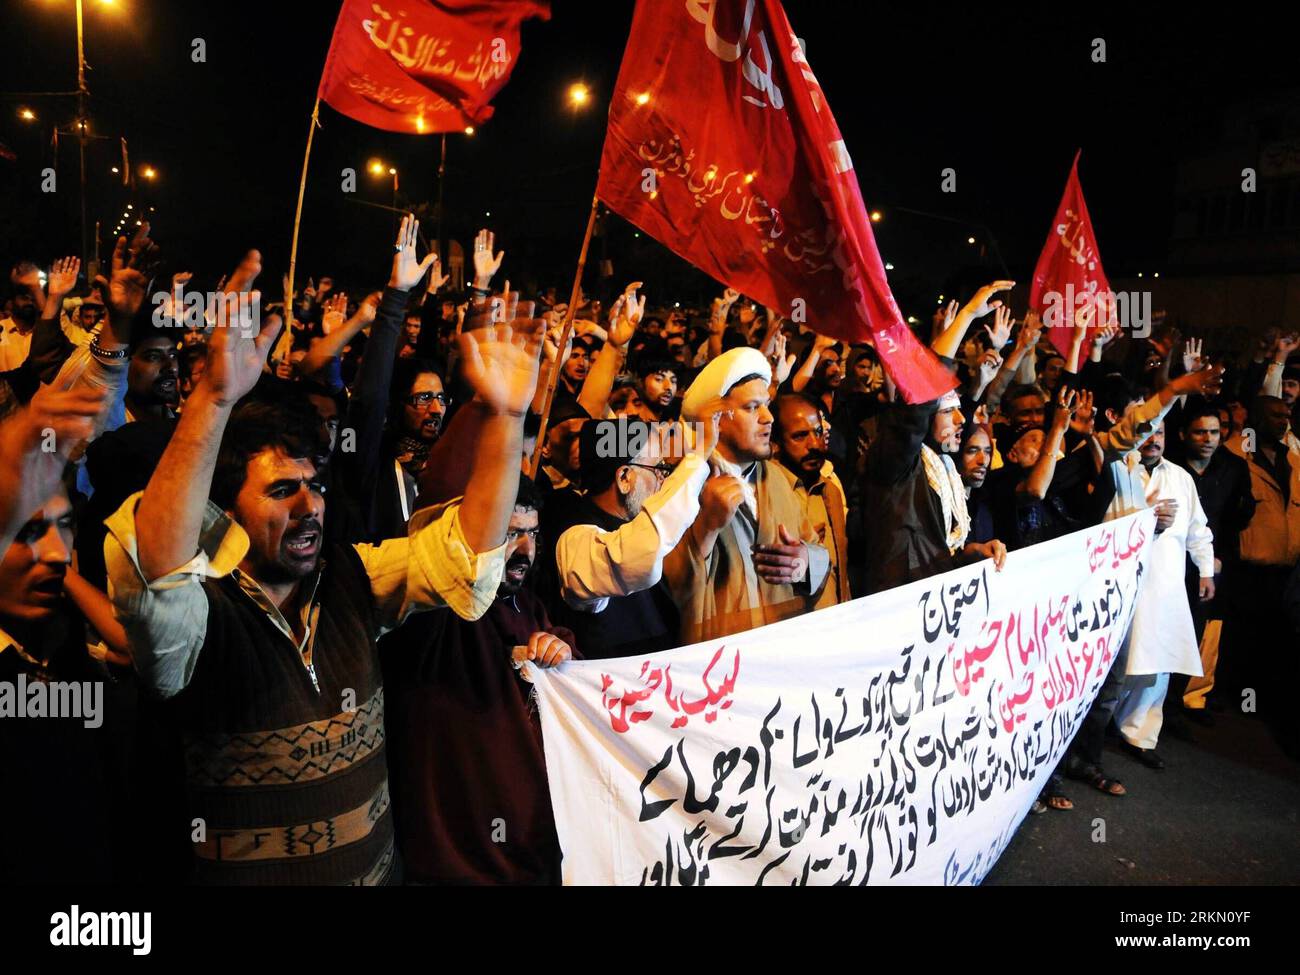 Bildnummer: 56893673  Datum: 16.01.2012  Copyright: imago/Xinhua (120116) -- KARACHI, Jan. 16, 2012 (Xinhua) -- Pakistani Shiite Muslims shout slogans to protest against the killing of their community members in a blast during a religious procession in southern Pakistan s Karachi on Jan. 16, 2012. At least 18 were killed and over 30 injured when a bomb blast hit a religious procession in the Khanpur area in eastern Pakistani province of Punjab on Sunday. (Xinhua/Masroor) PAKISTAN-KARACHI-PROTEST PUBLICATIONxNOTxINxCHN Gesellschaft Politik Demo Protest xjh x0x 2012 quer      56893673 Date 16 01 Stock Photo